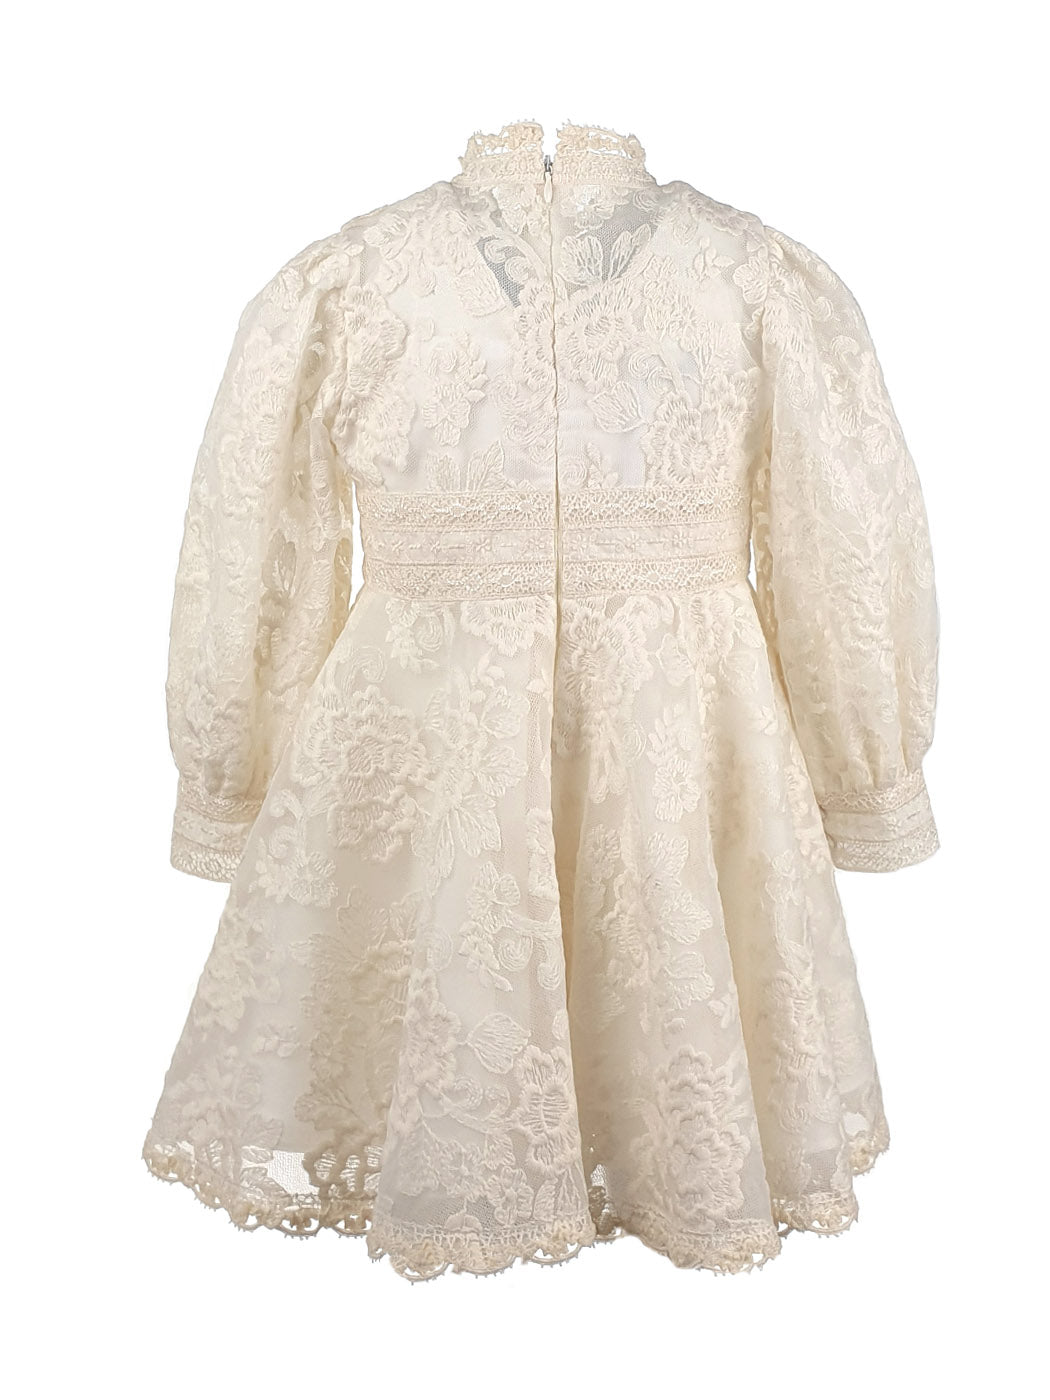 Girl's Lace dress with long sleeves - MAIRA cream